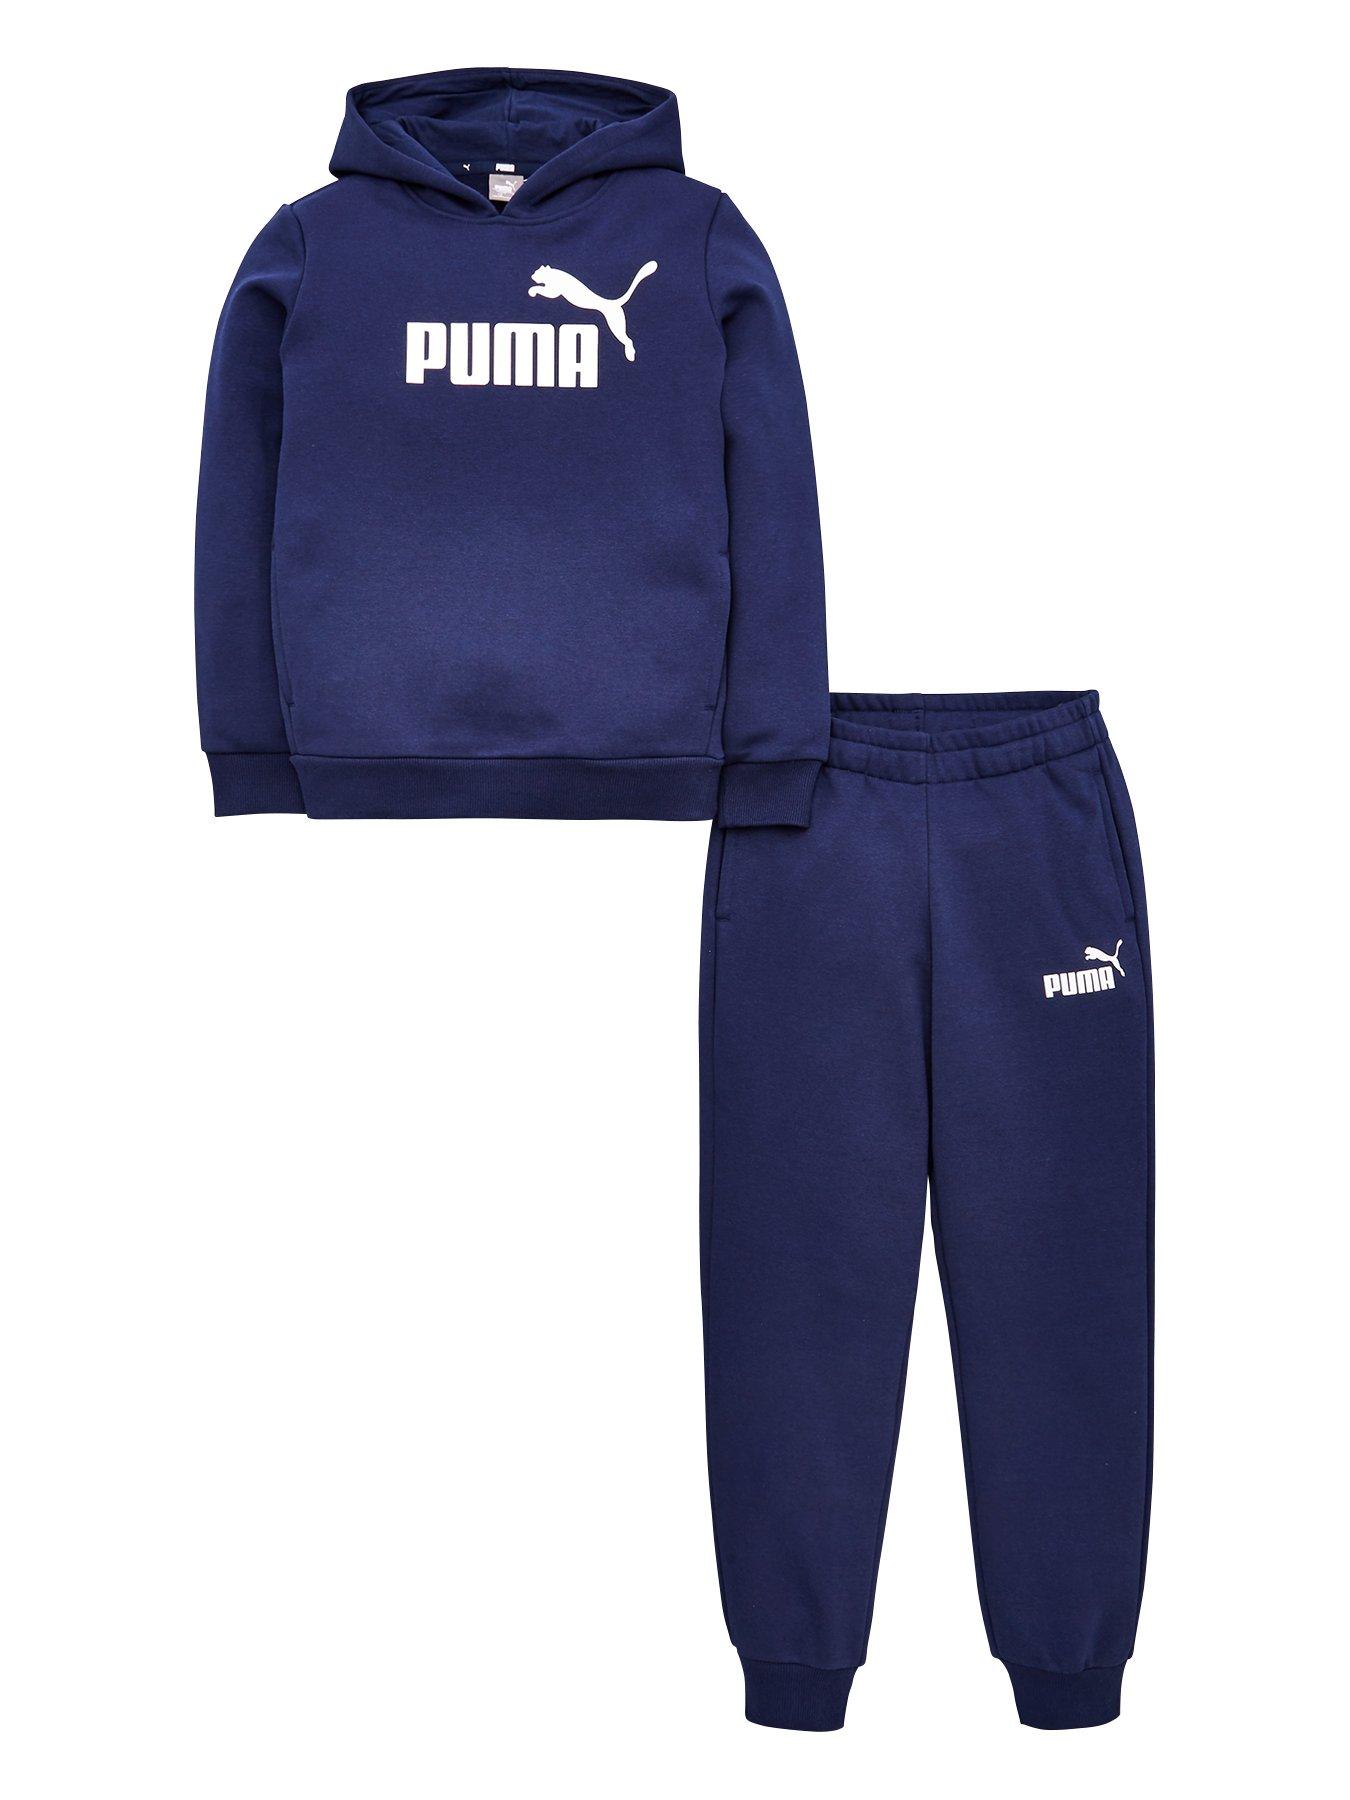 puma sweatsuit for toddlers